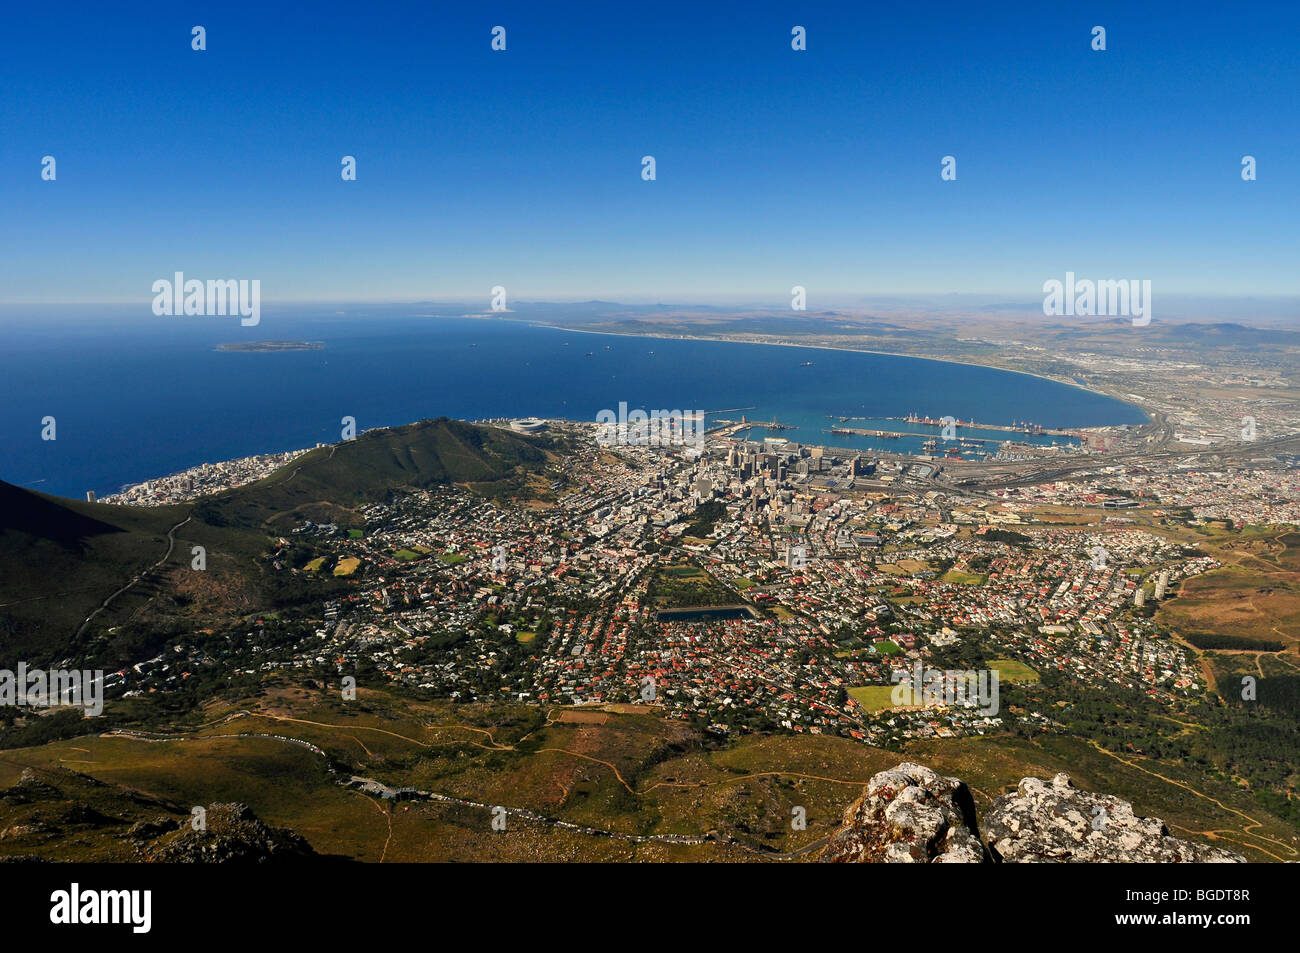 The view from Table Mountain overlooking the city of Cape Town and lions head in South Africa Stock Photo